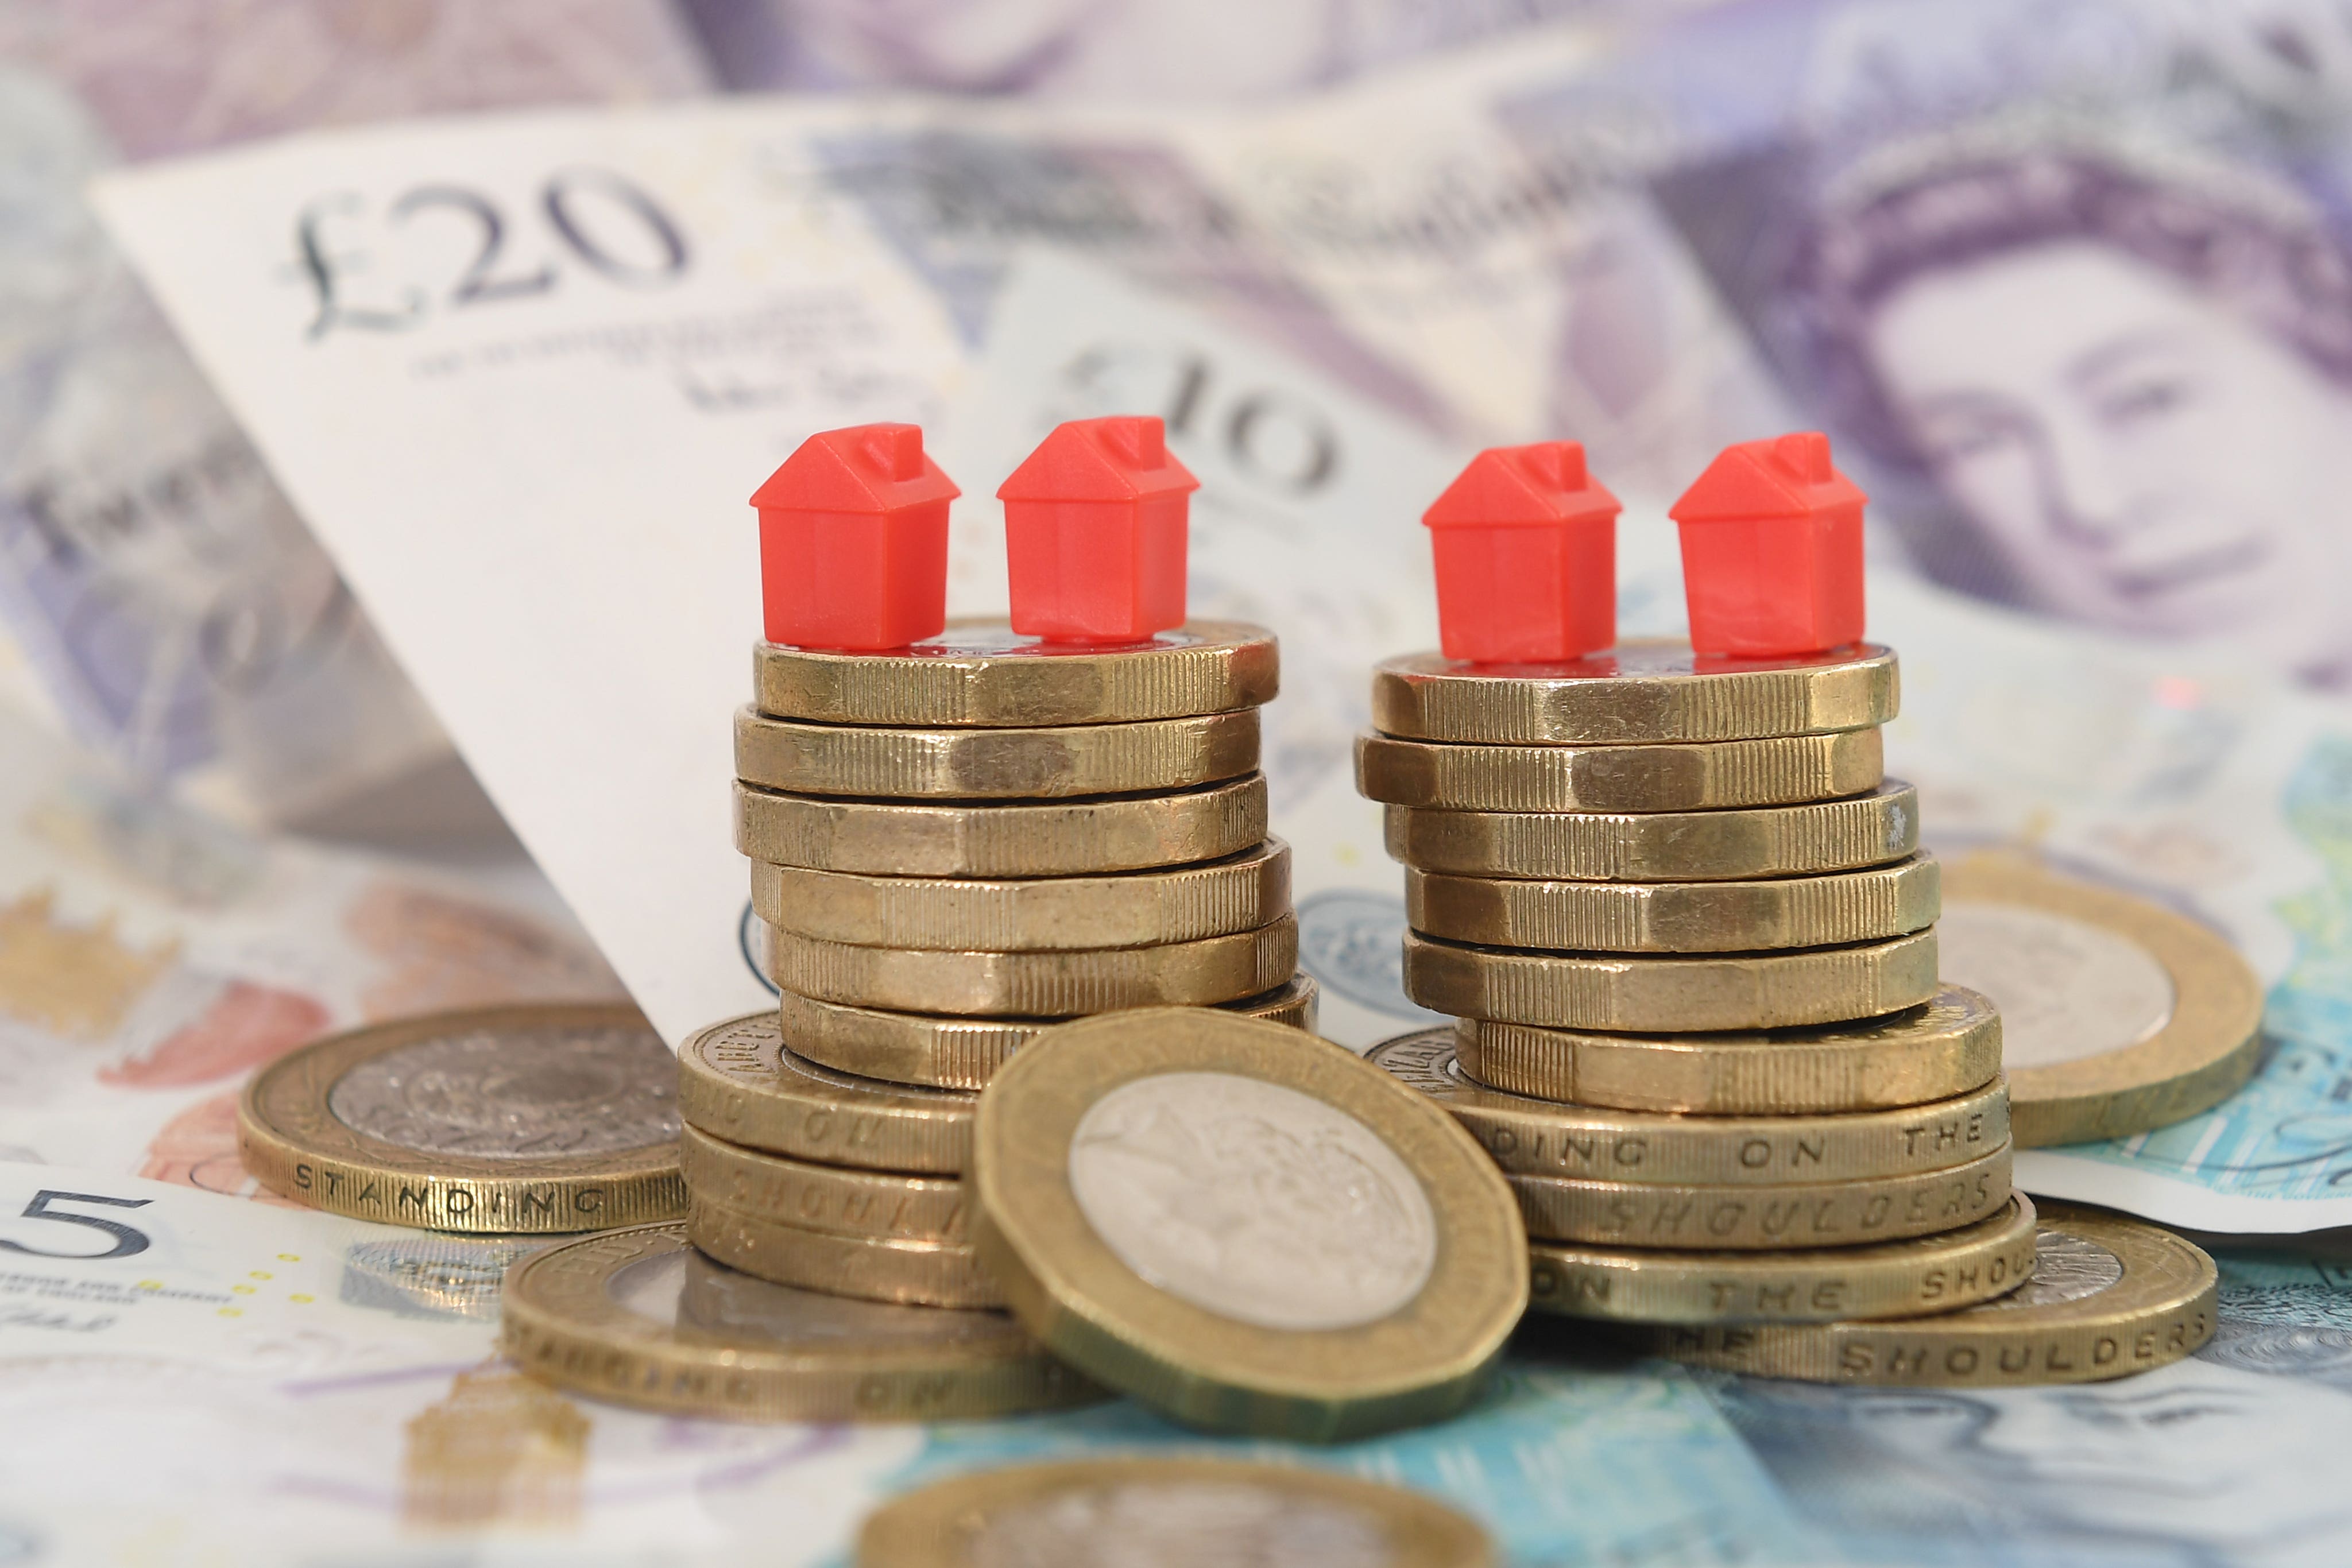 The total value of outstanding mortgage balances with arrears has reached its highest level since 2014, according to the Bank of England